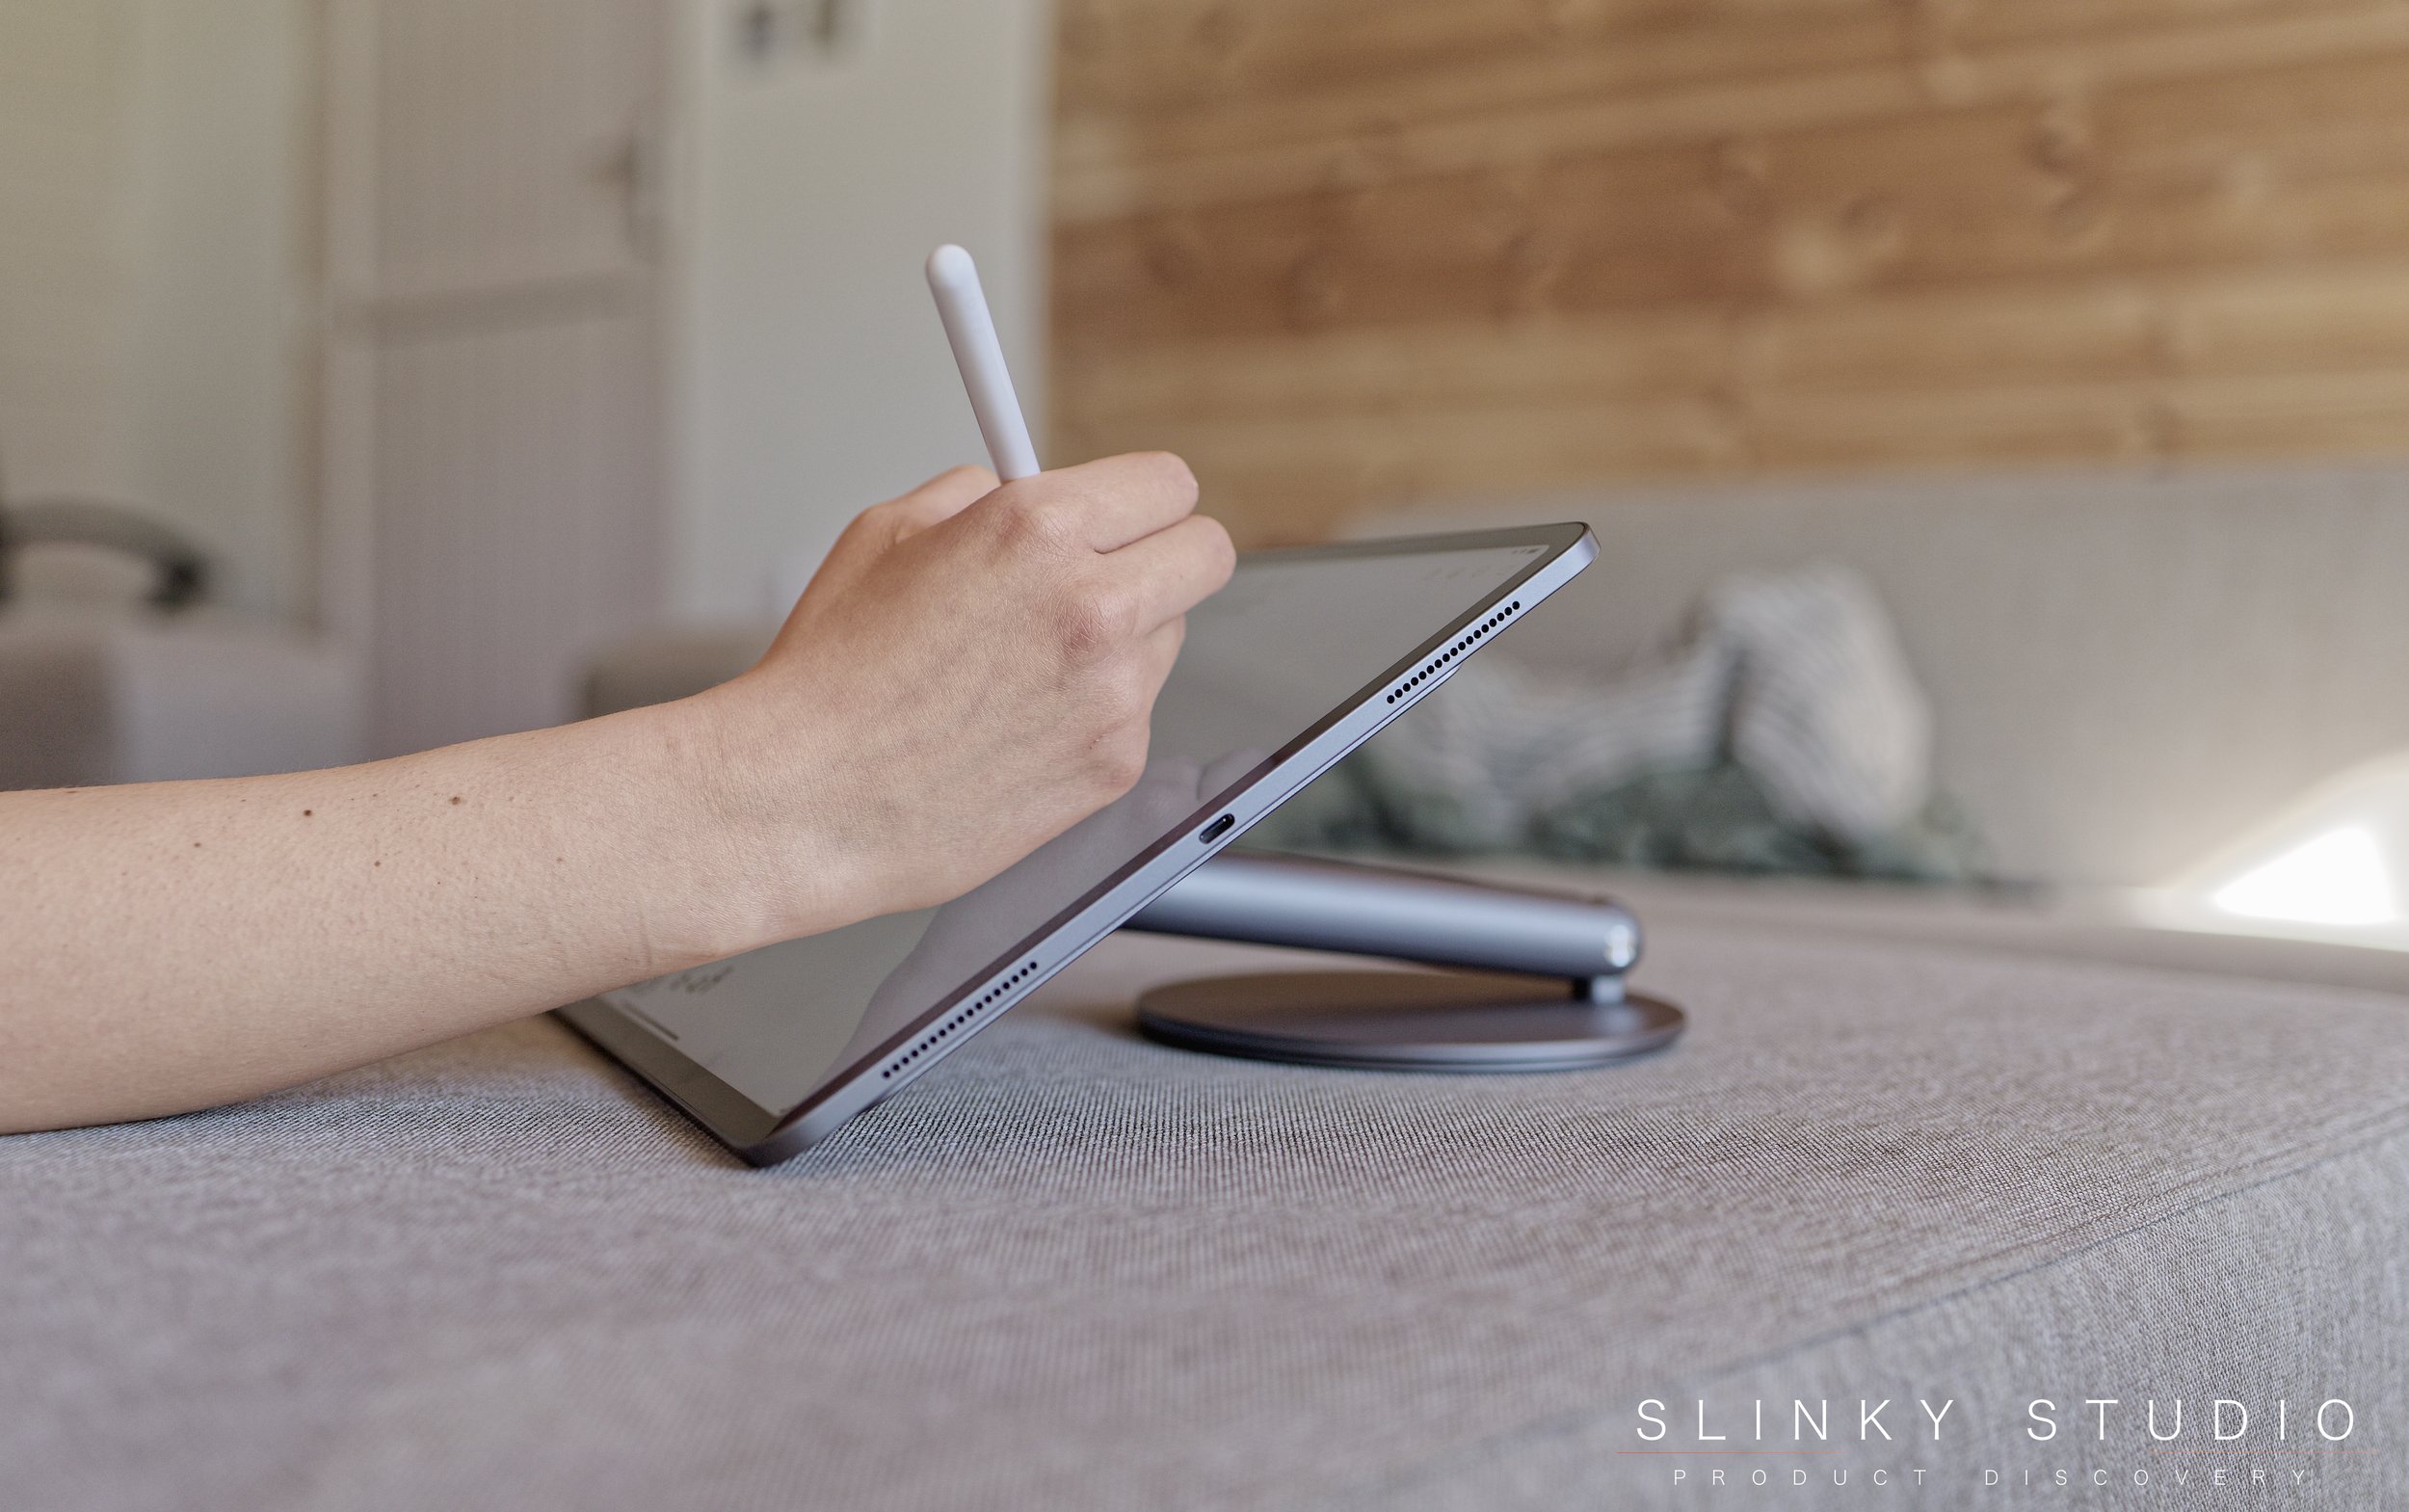 Benks Infinity Pro Magnetic Stand for iPad Pro 12.9%22 Drawing.jpg